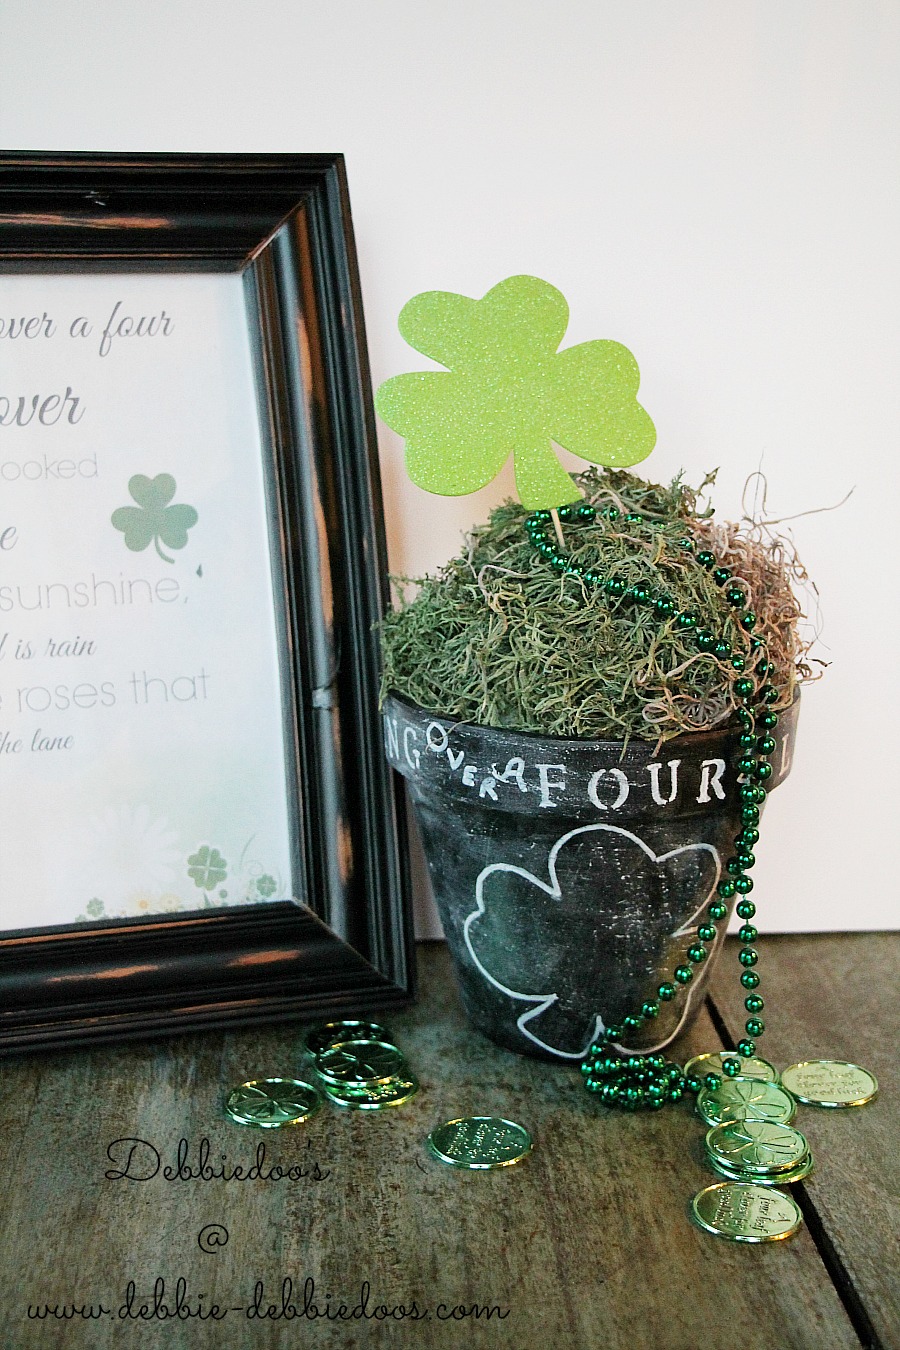 I'm looking over a four leaf clover pot and printable